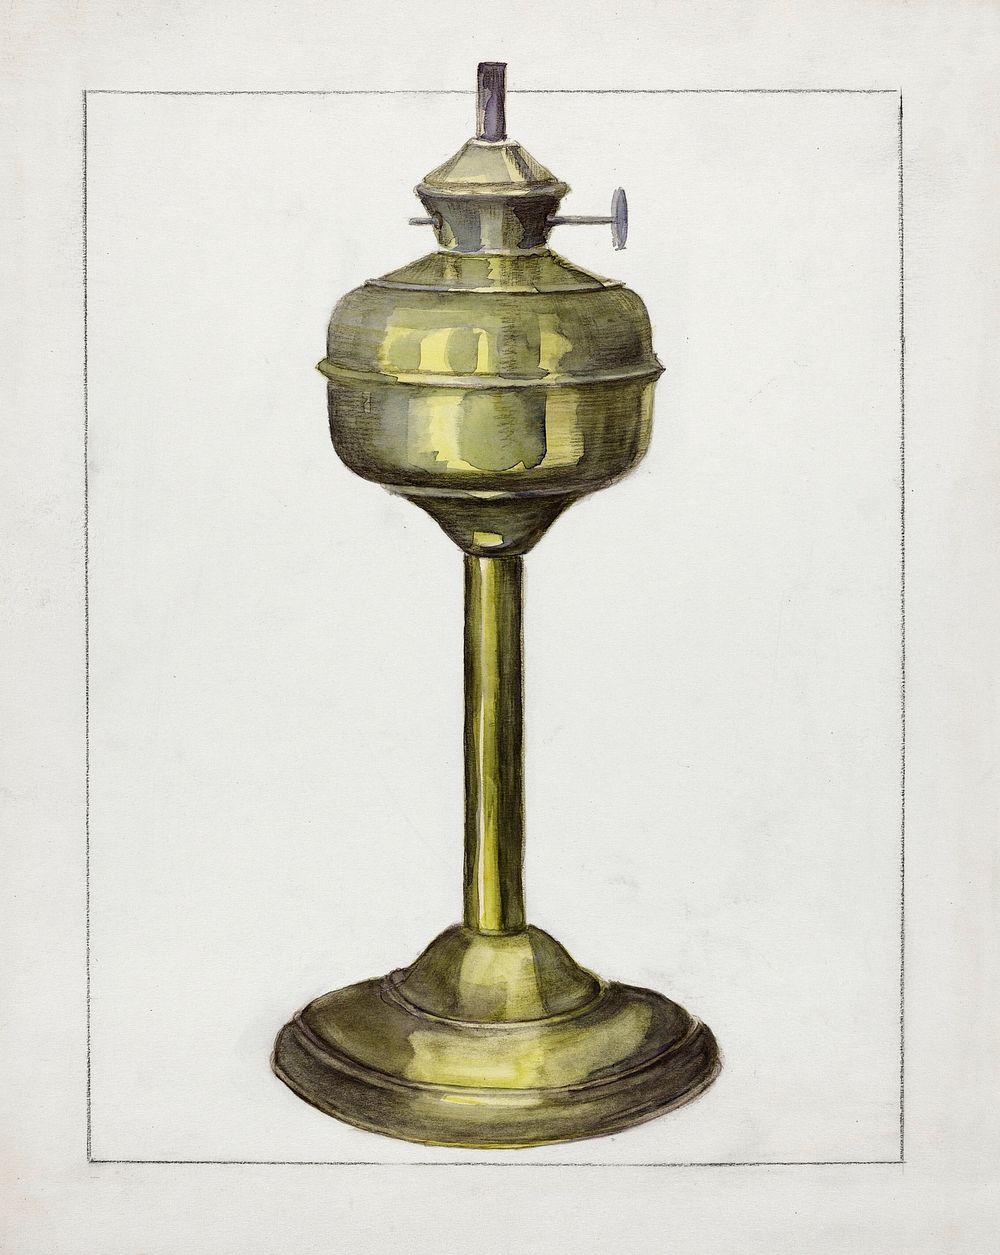 Lamp (1936) by Hester Duany. Original from The National Gallery of Art. Digitally enhanced by rawpixel.